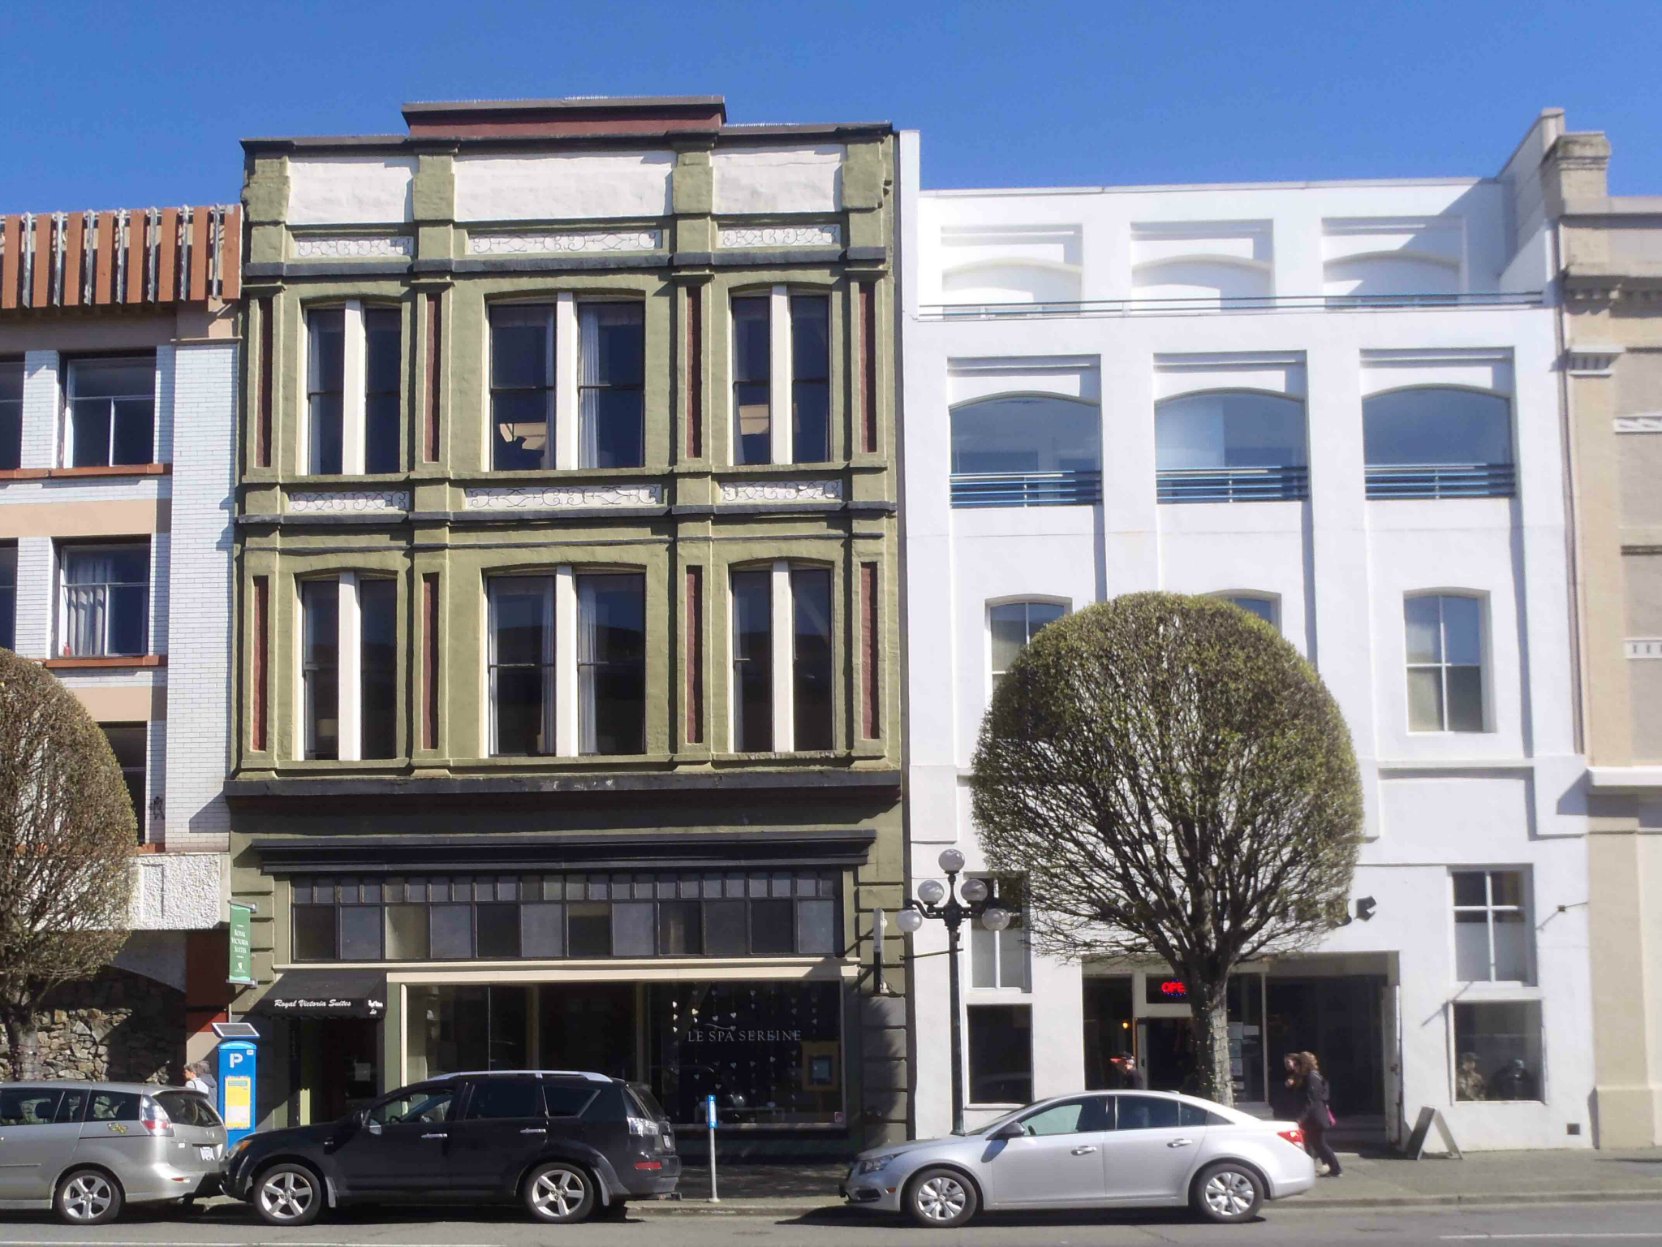 1407 Government Street (right), built in 1889, and 1411 Government Street (left), built in 1891. (photo by Victoria Online Sightseeing Tours)